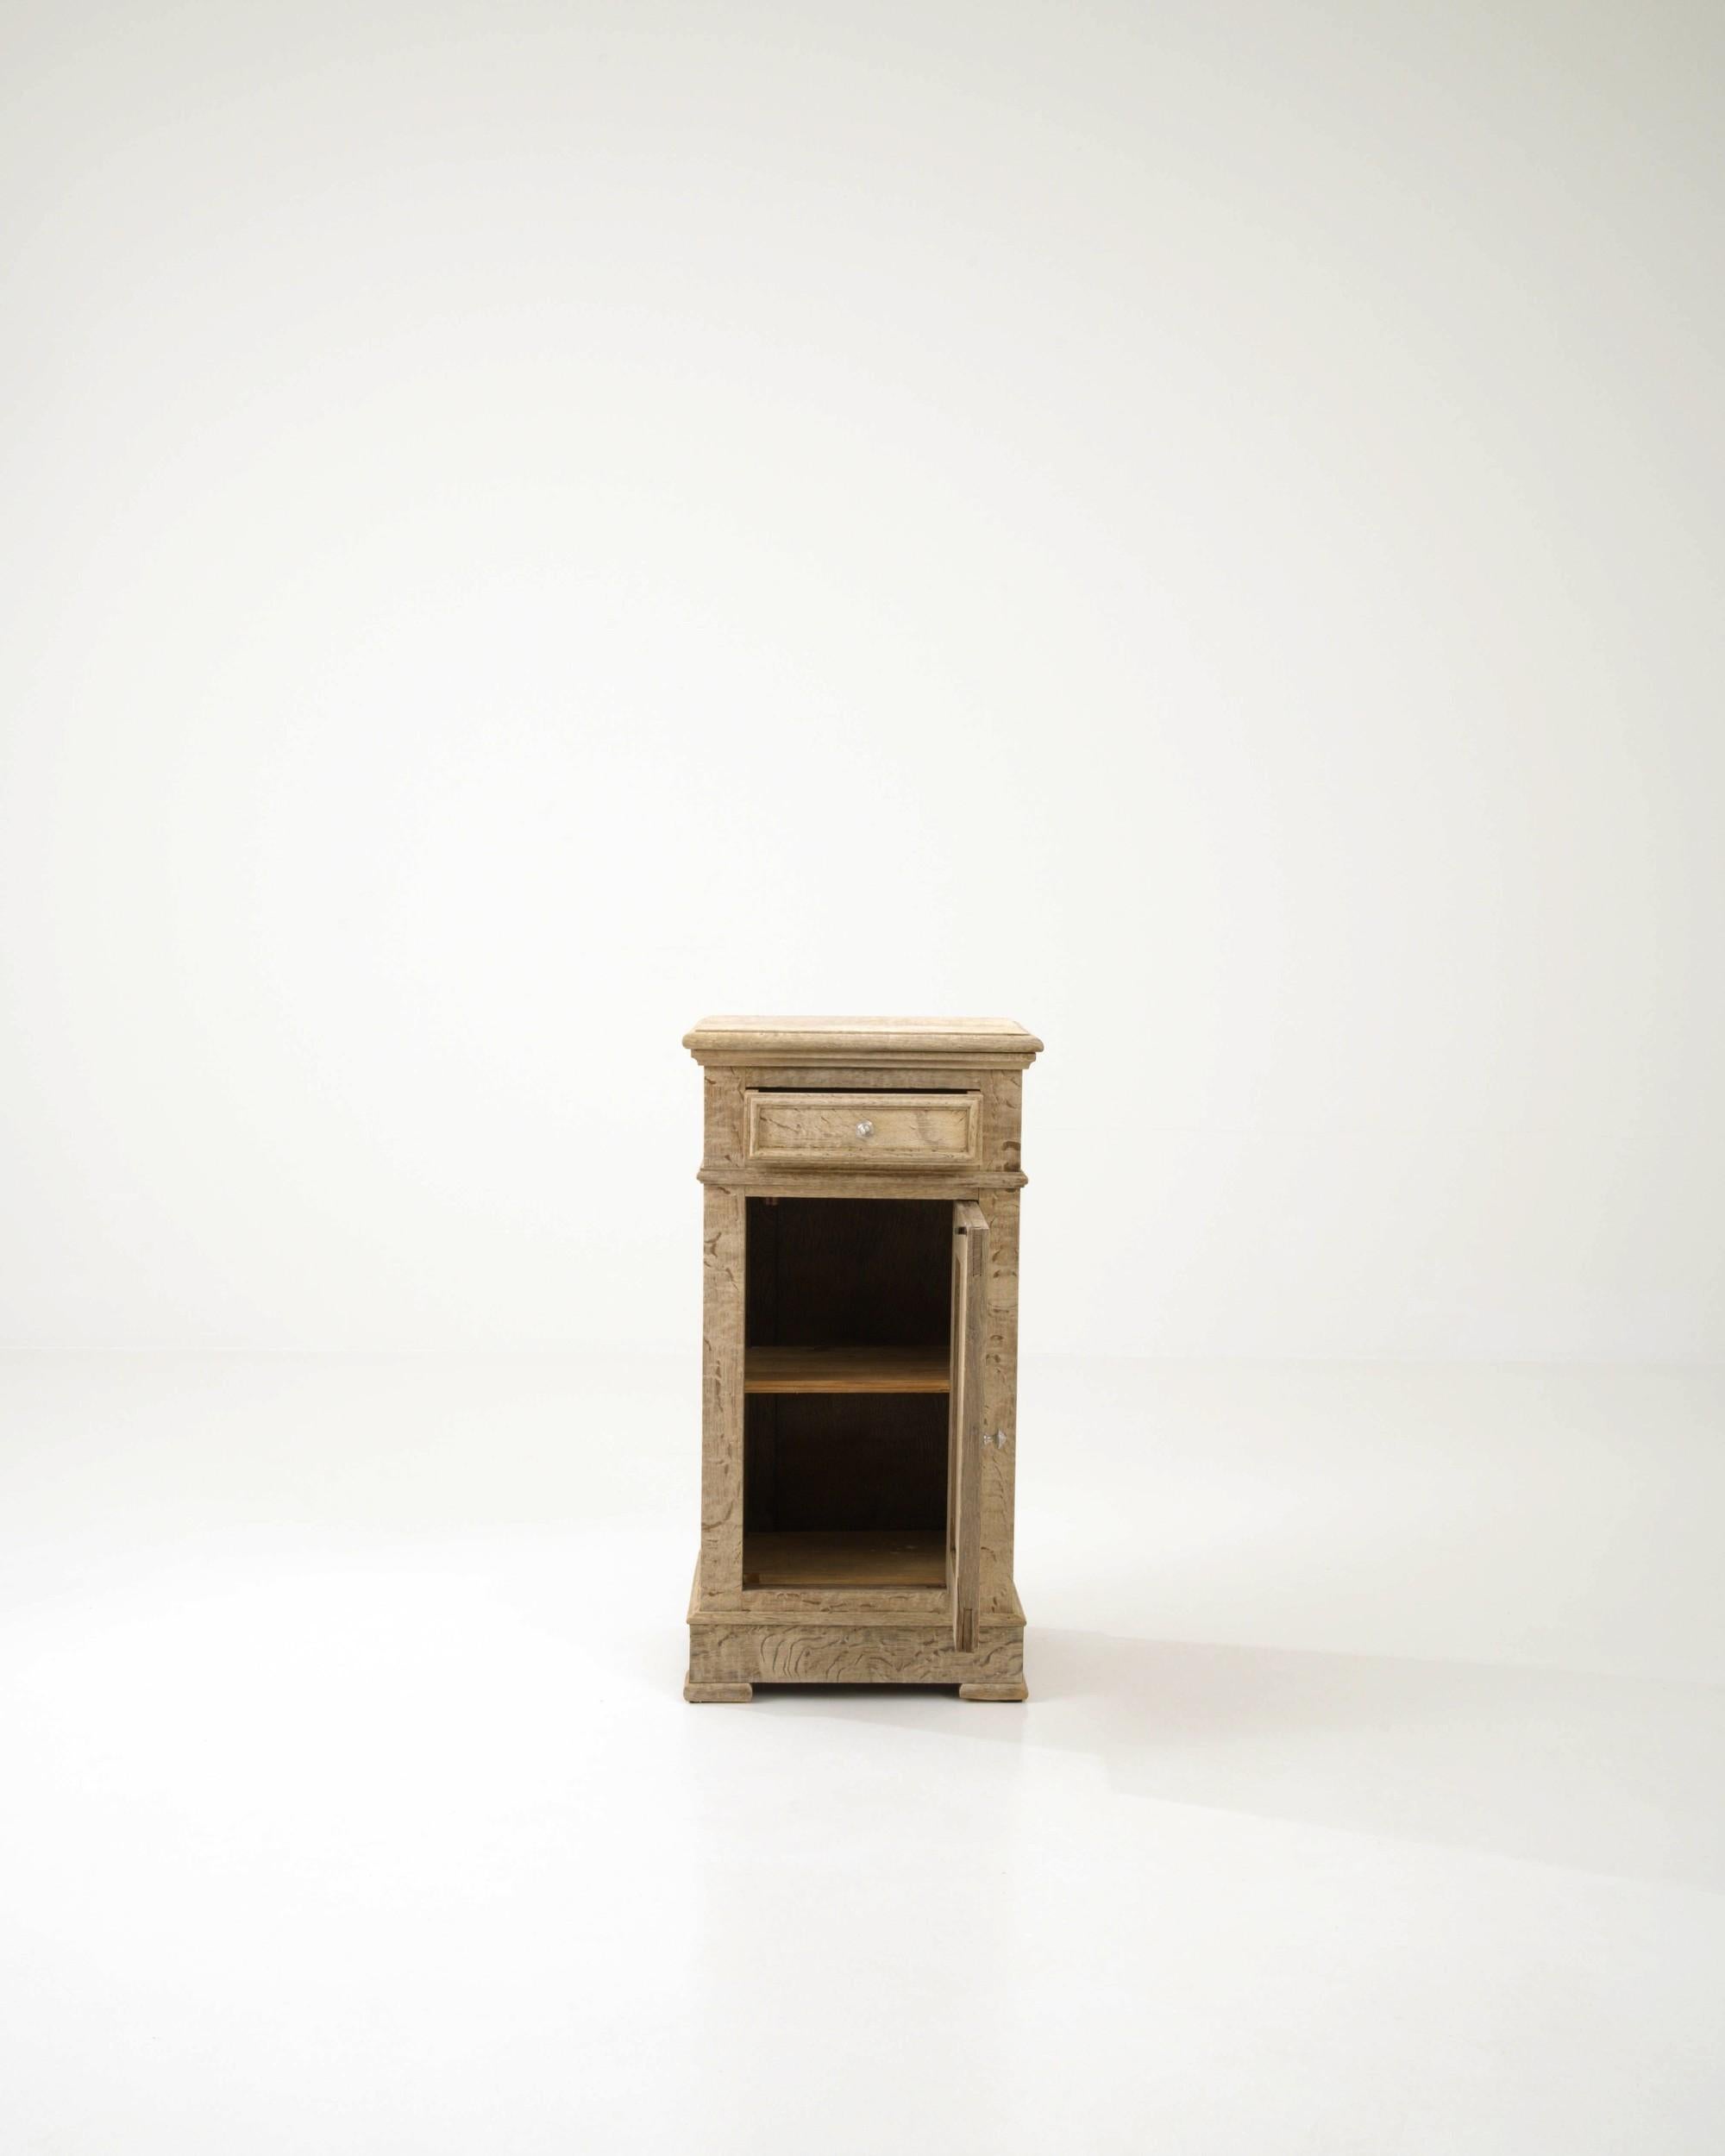 French Provincial Antique French Bleached Oak Bedside Table